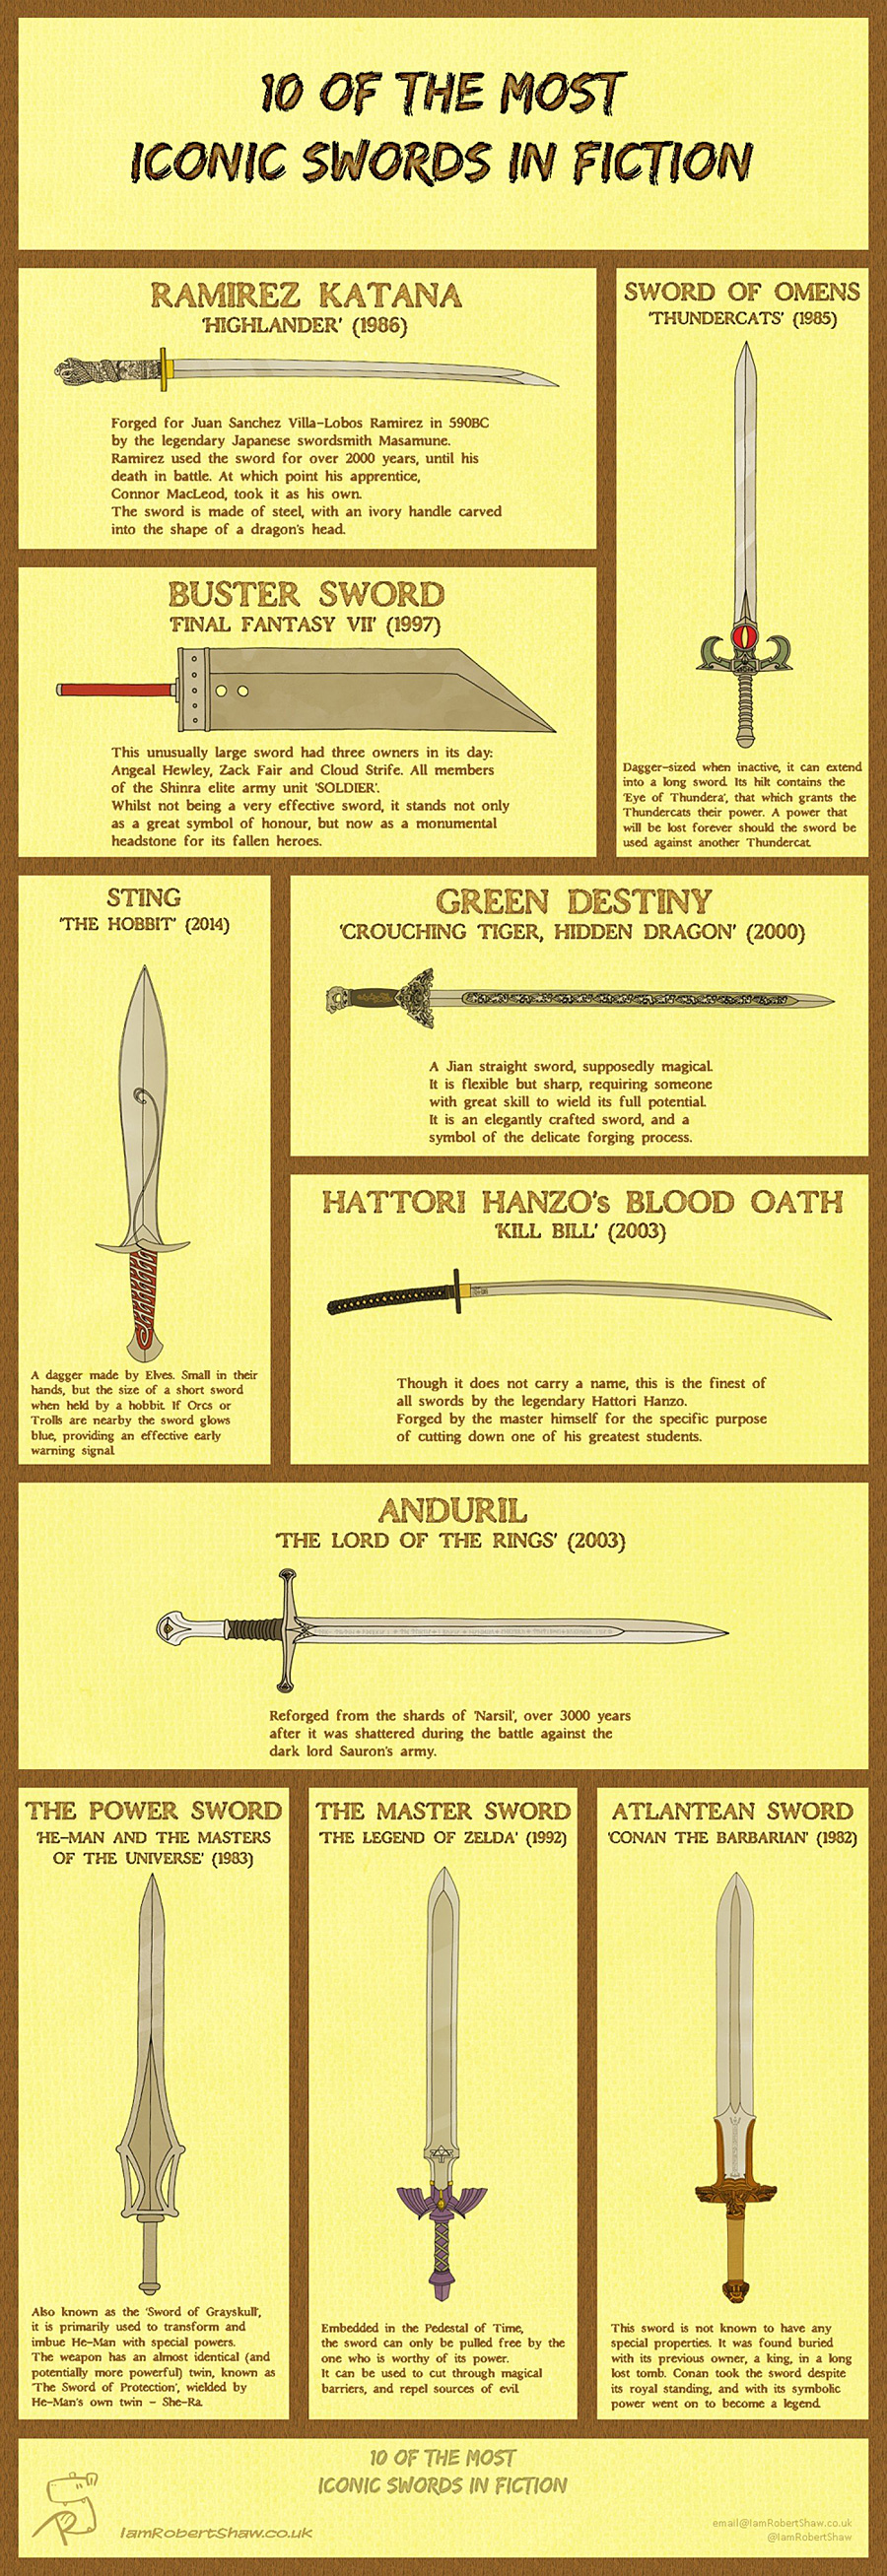 10 of the Most Iconic Swords in Fiction